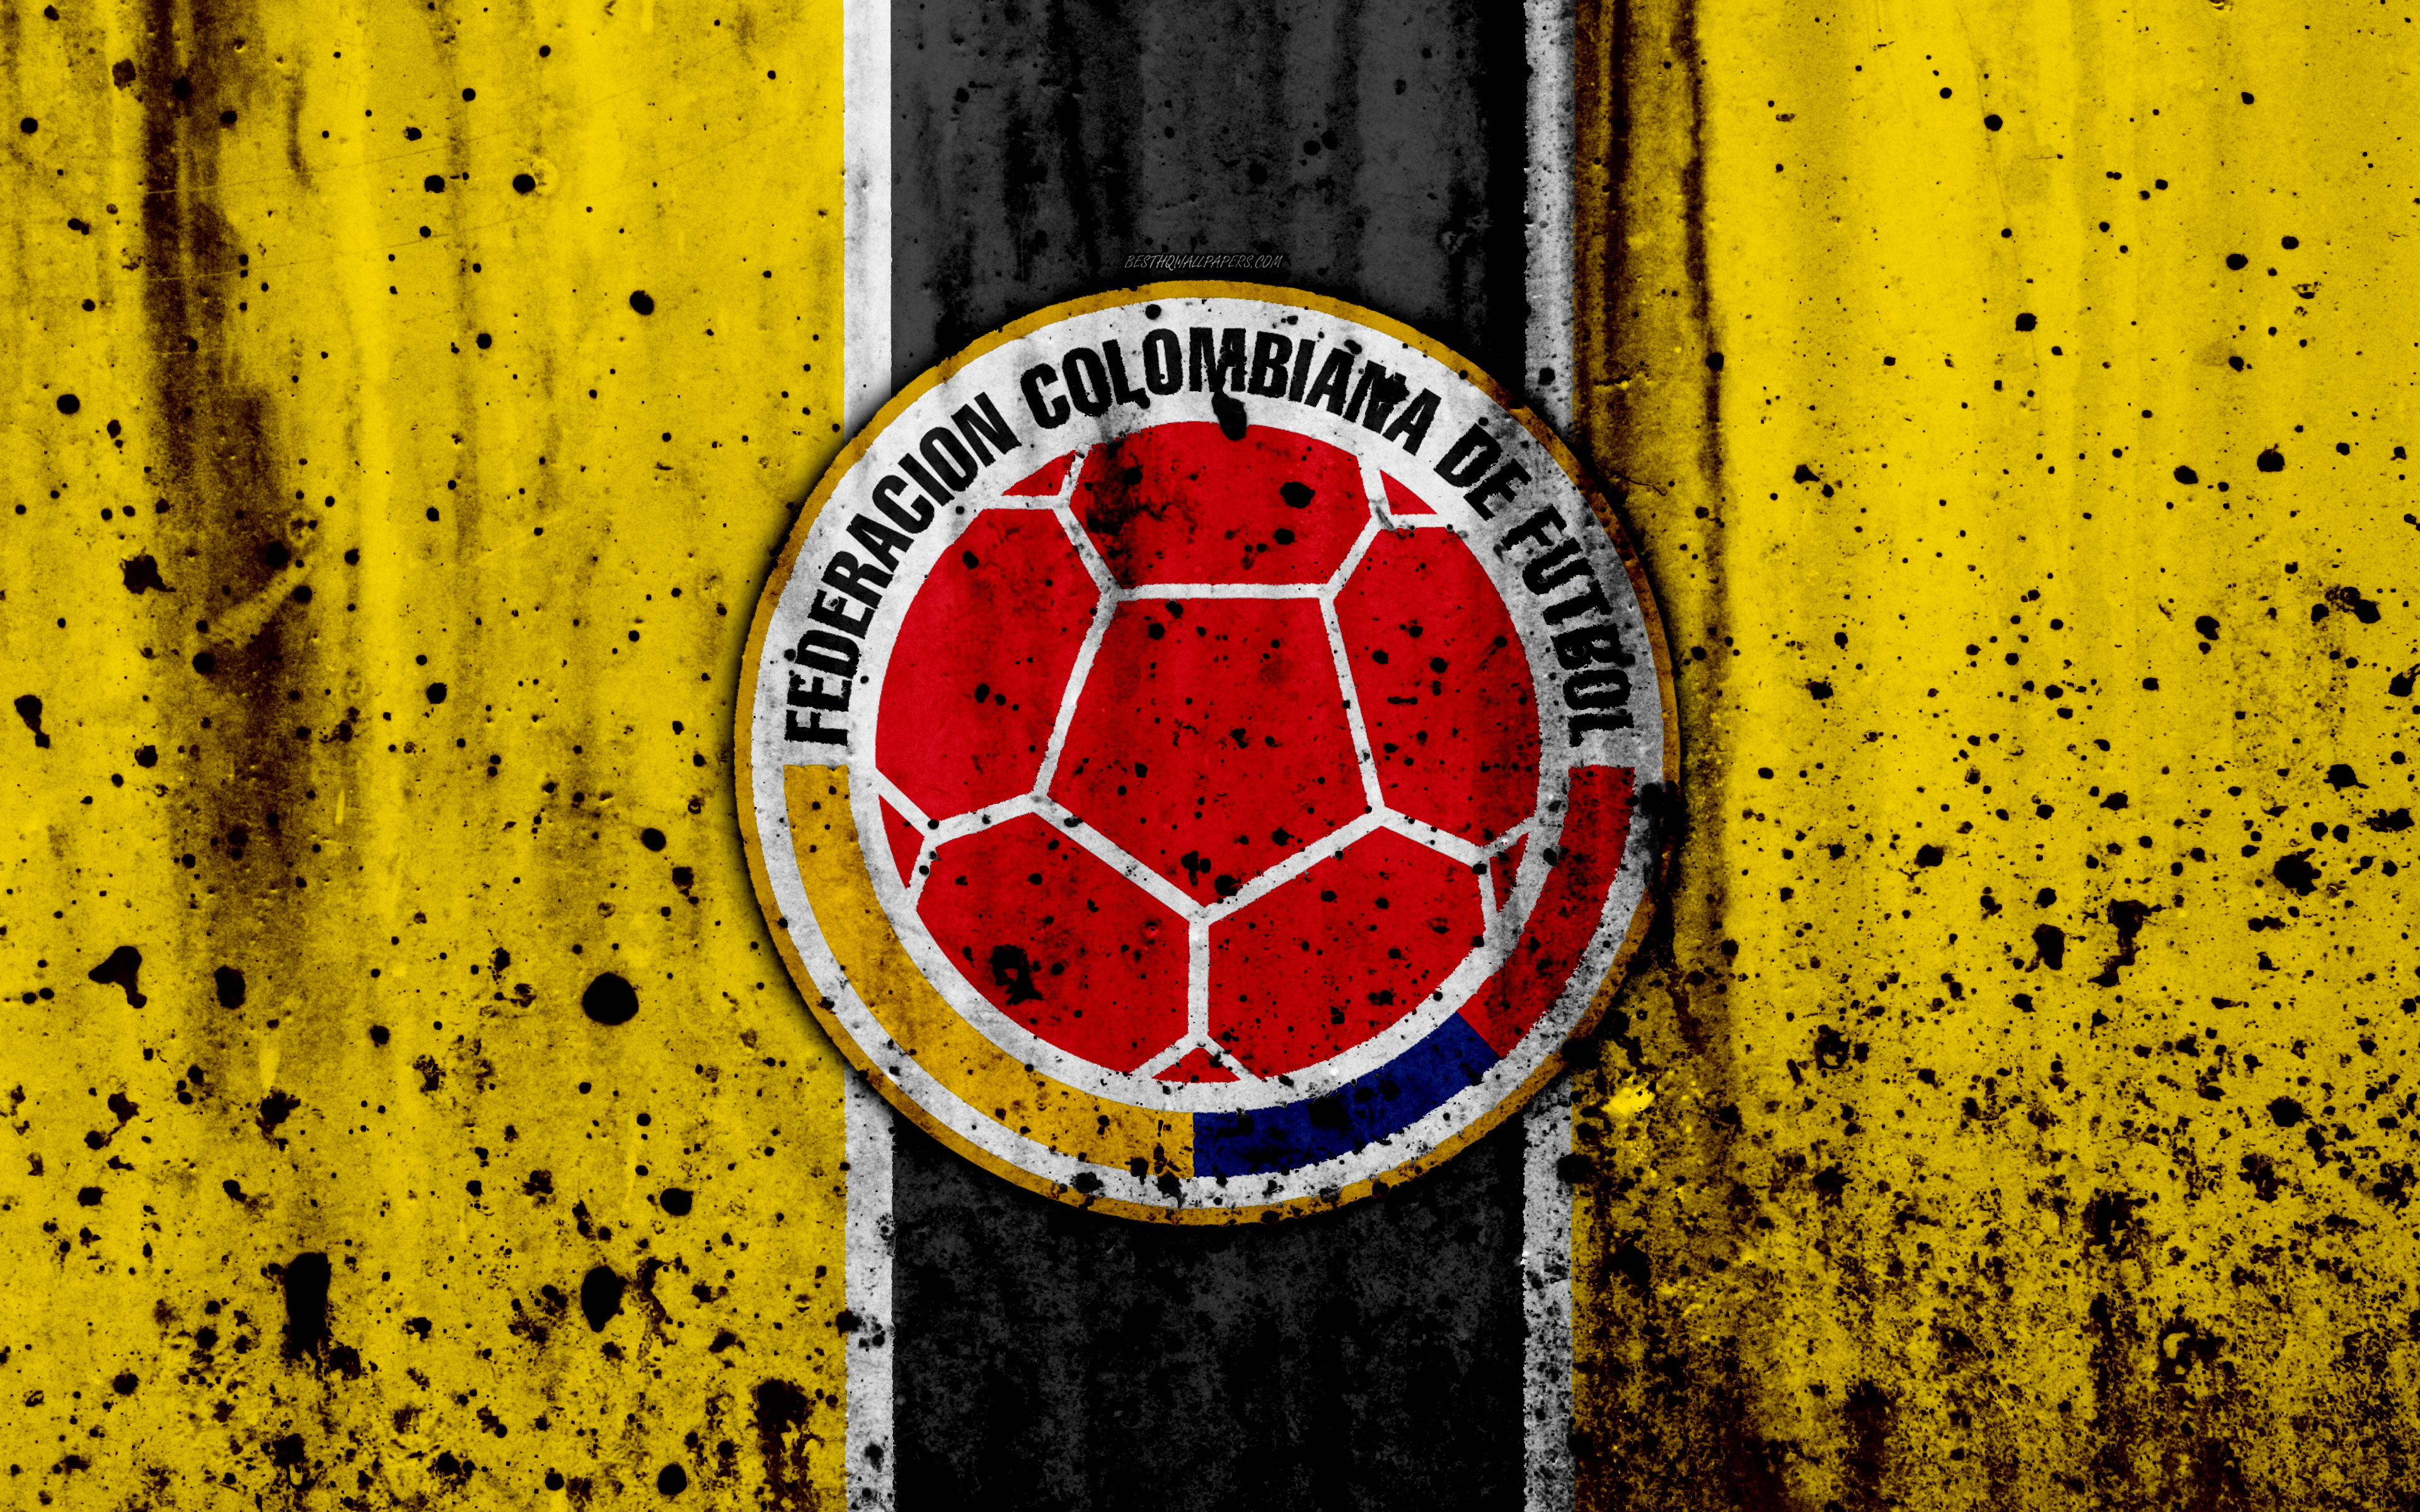 17 colombia national football team wallpapers on wallpapersafari 17 colombia national football team